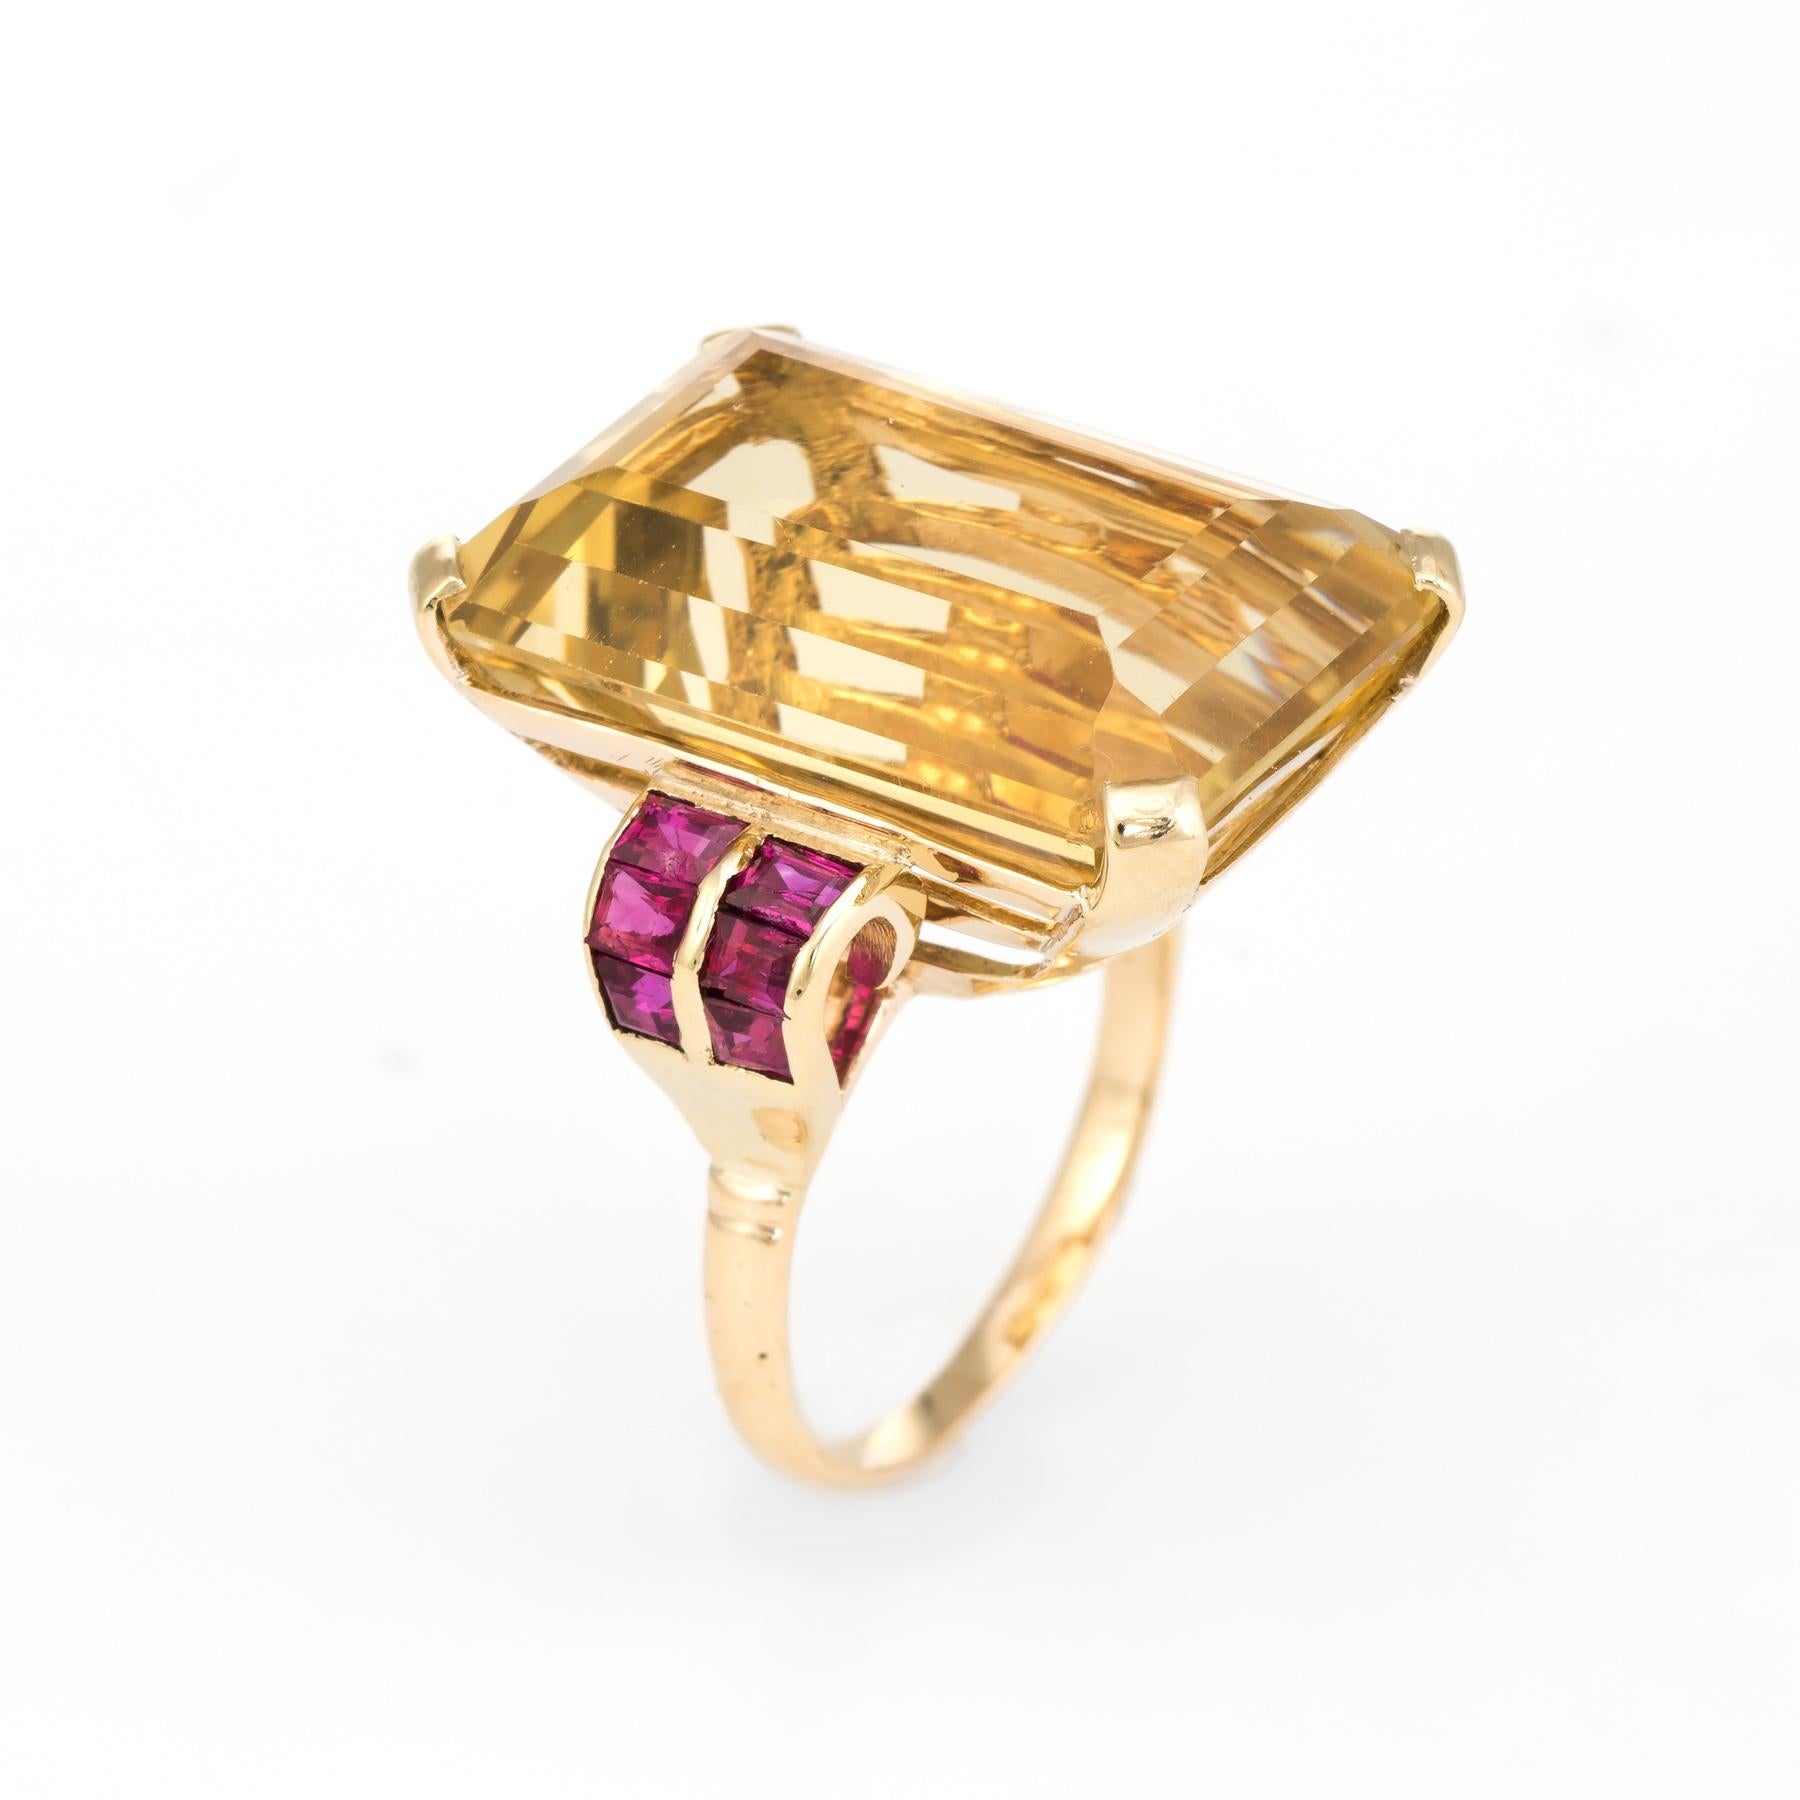 Dramatic large vintage statement cocktail ring (circa 1940s to 1950s), crafted in 14 karat yellow gold. 

Centrally mounted emerald cut citrine measures 21mm x 14mm (estimated at 25 carats), accented with 12 approx. 0.05 carat emerald cut rubies.